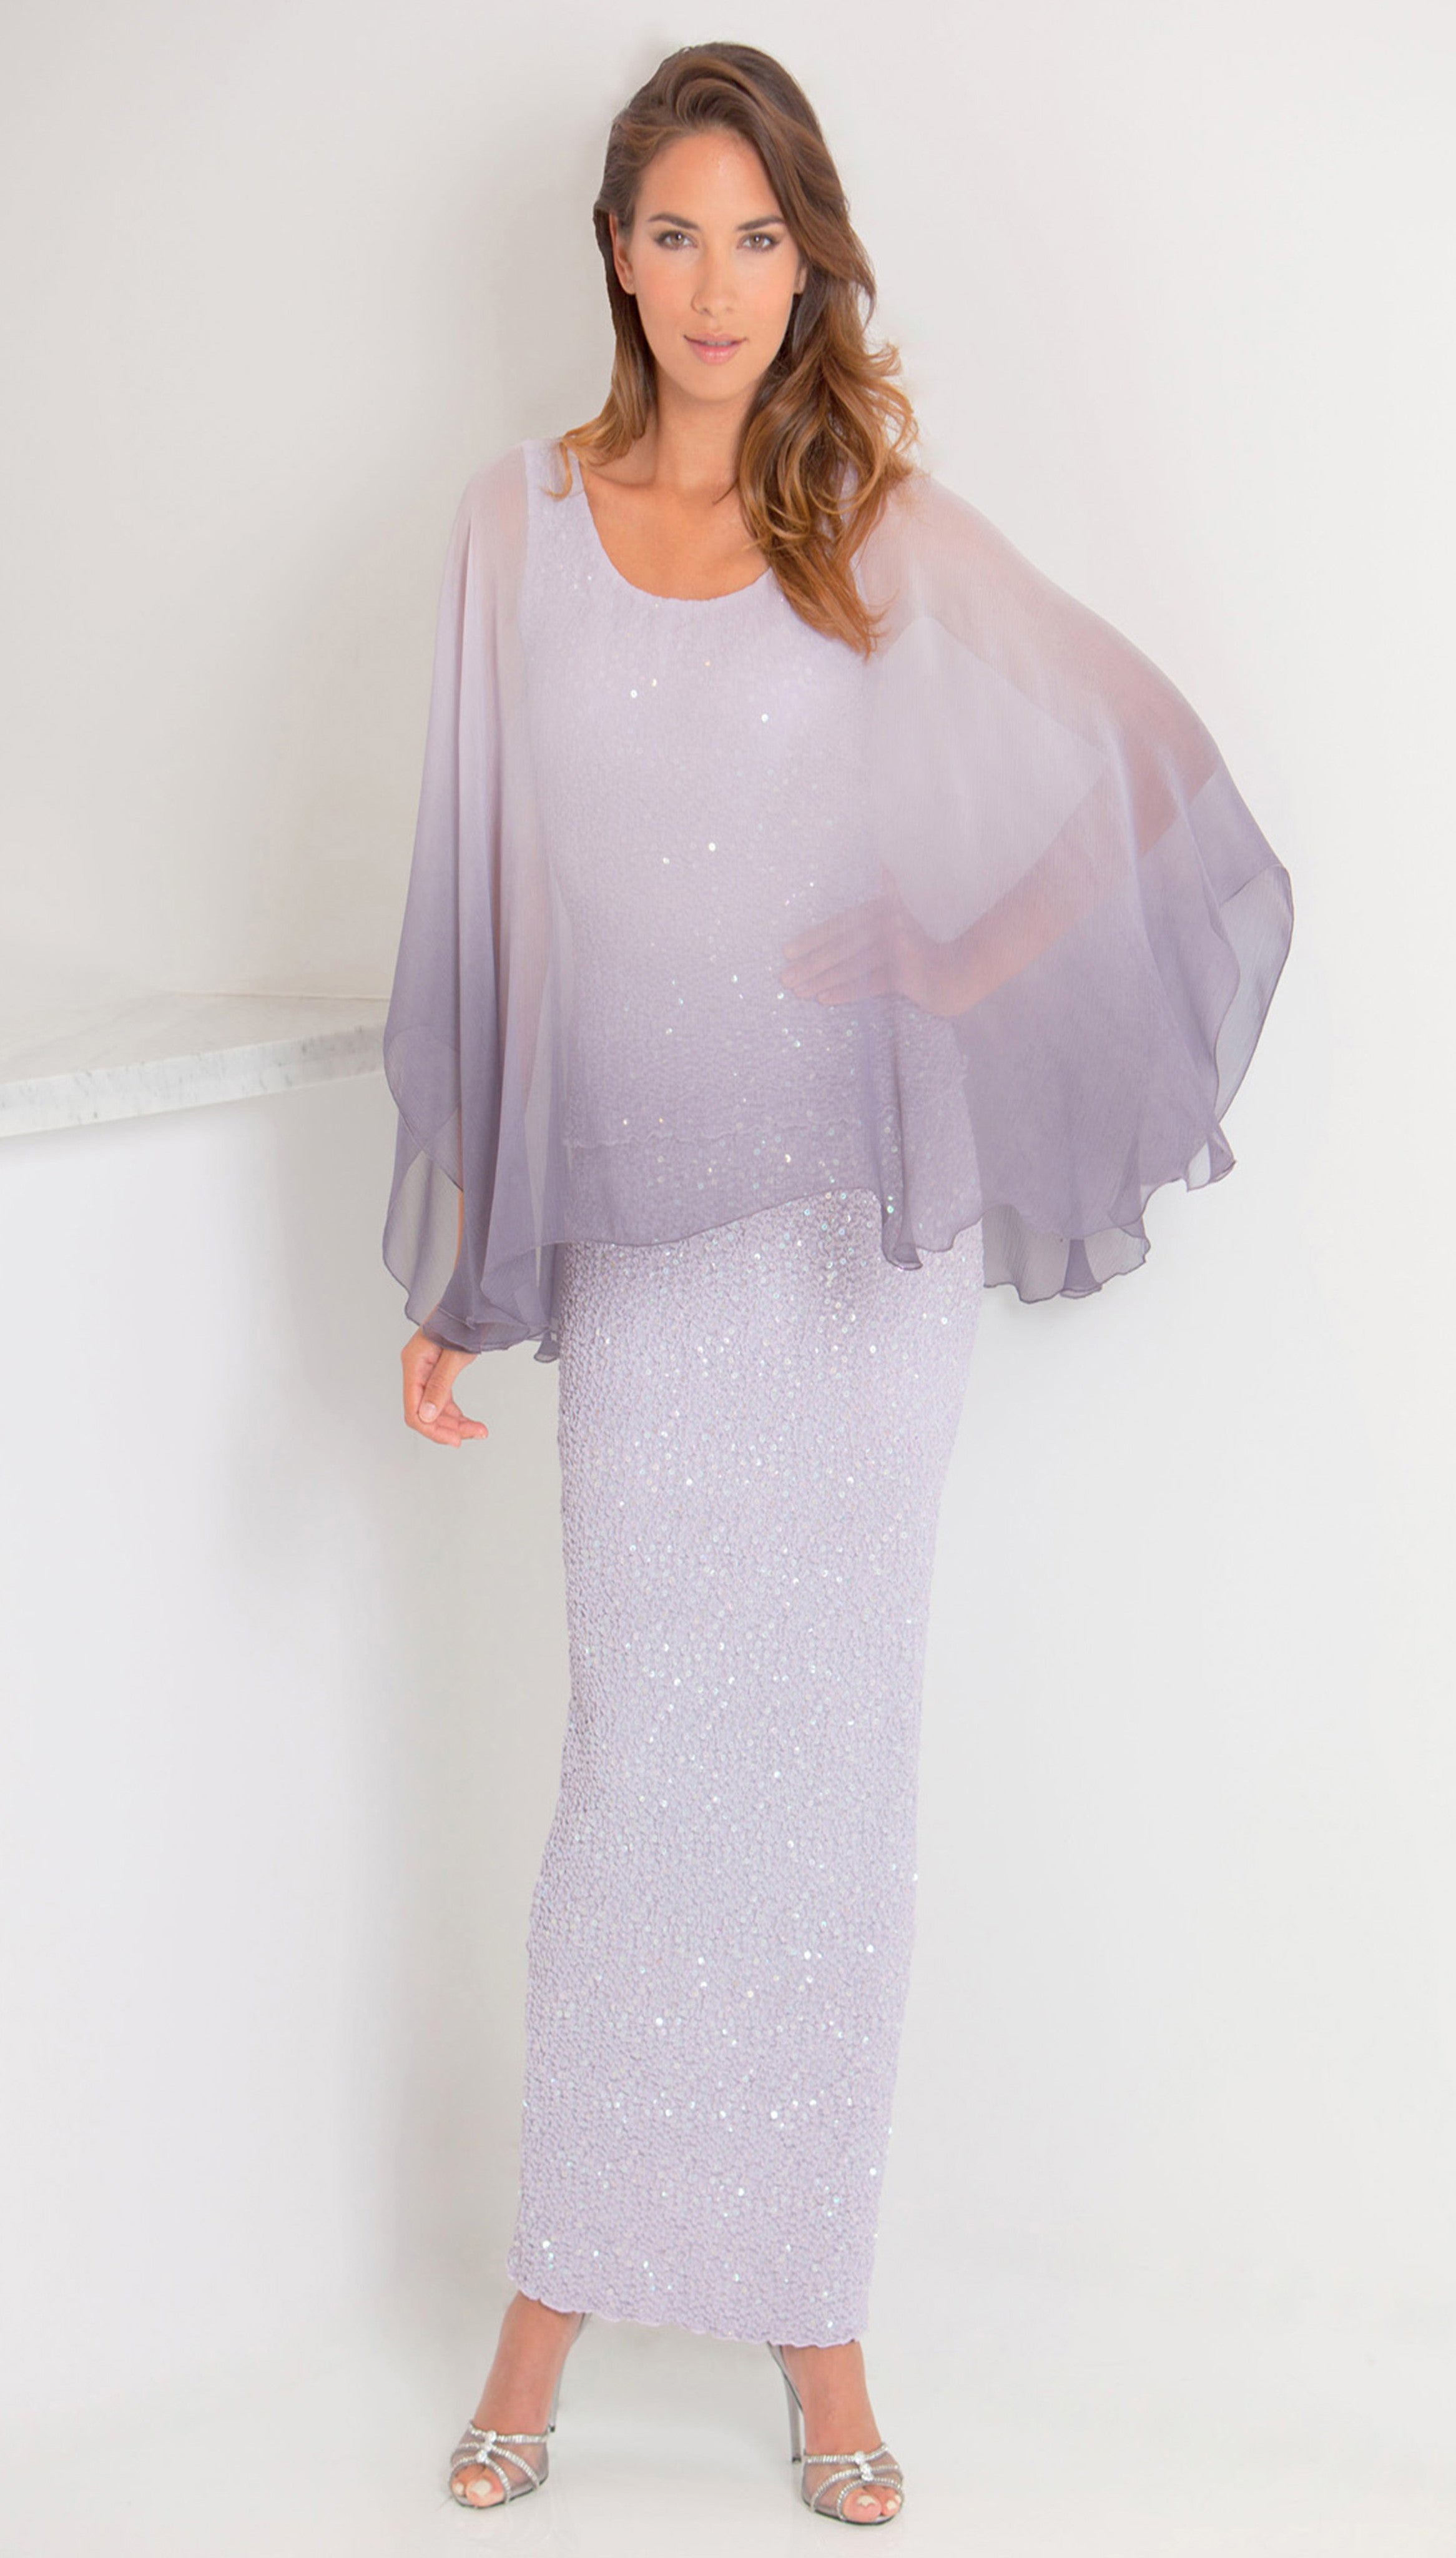 Silk Sequin Pucker Blouse with Overlay. Paired With Sequin Pucker Skirt - B1520 OMSC/S1530SC - Sara Mique Evening Wear